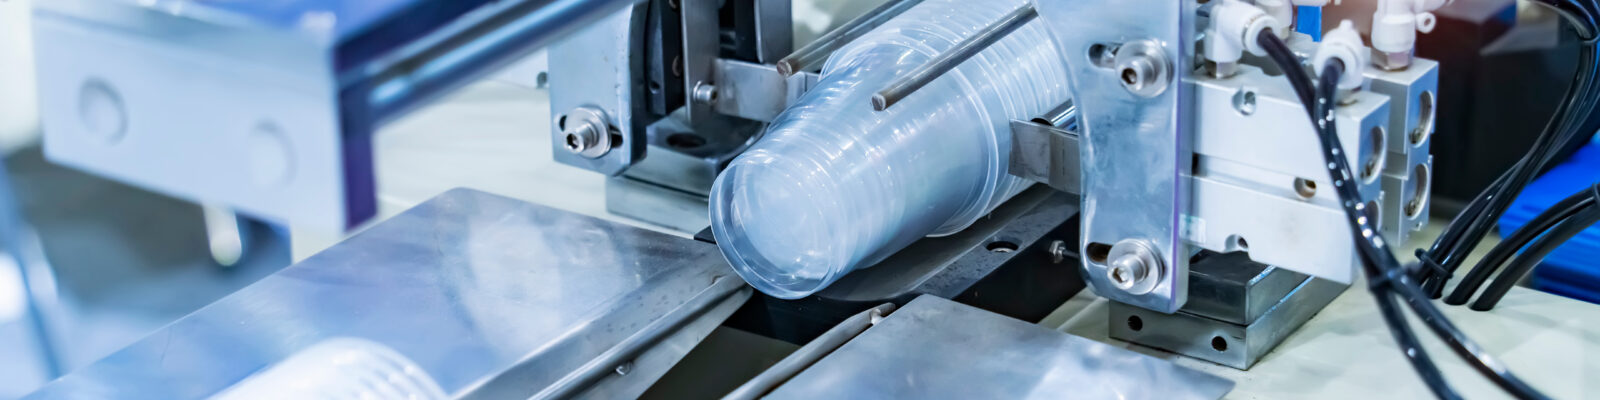 Stack of polypropylene food containers cup on conveyor belt of a